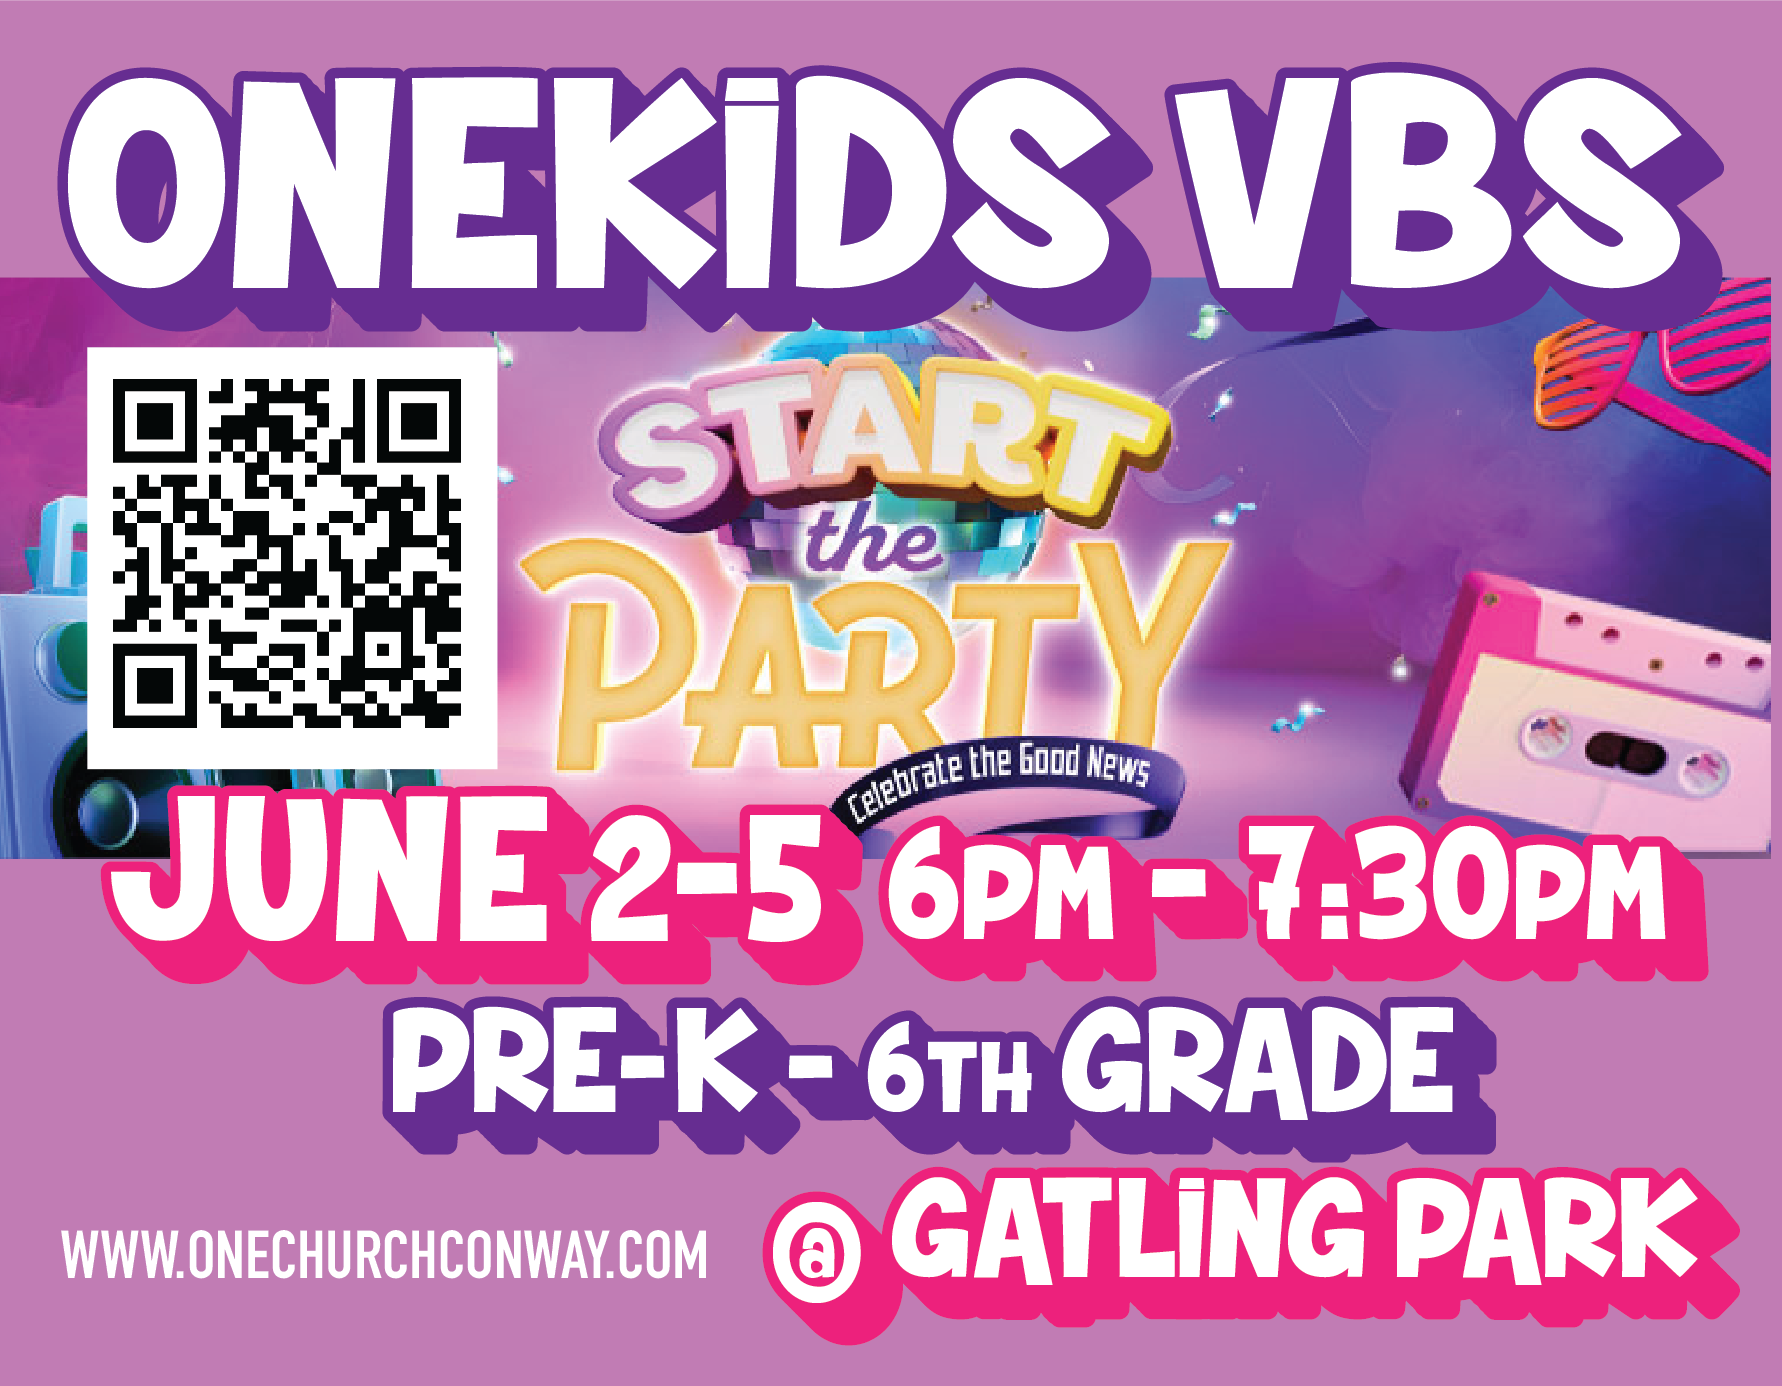 Children VBS event flyer with date, time, and QR code.